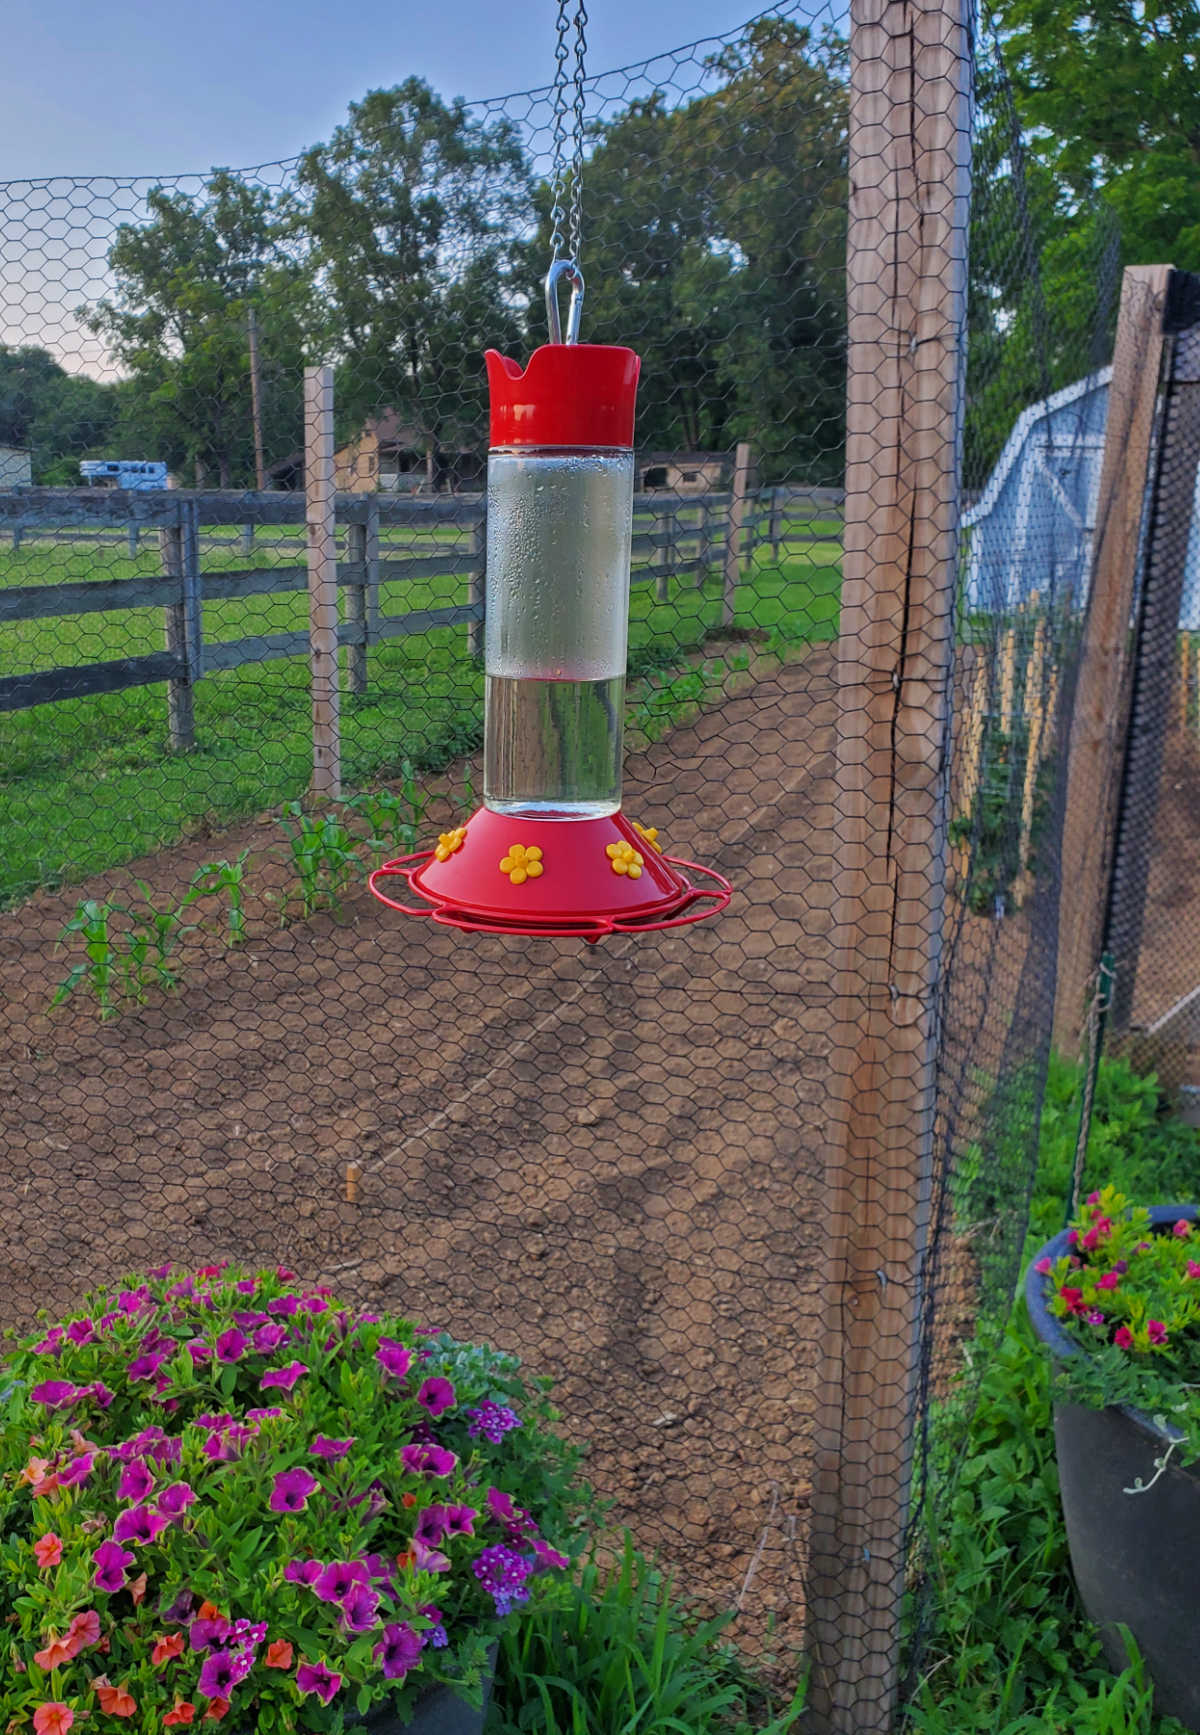 Glass hummingbird feeder with red plastic bottom hung off vegetable garden fence.